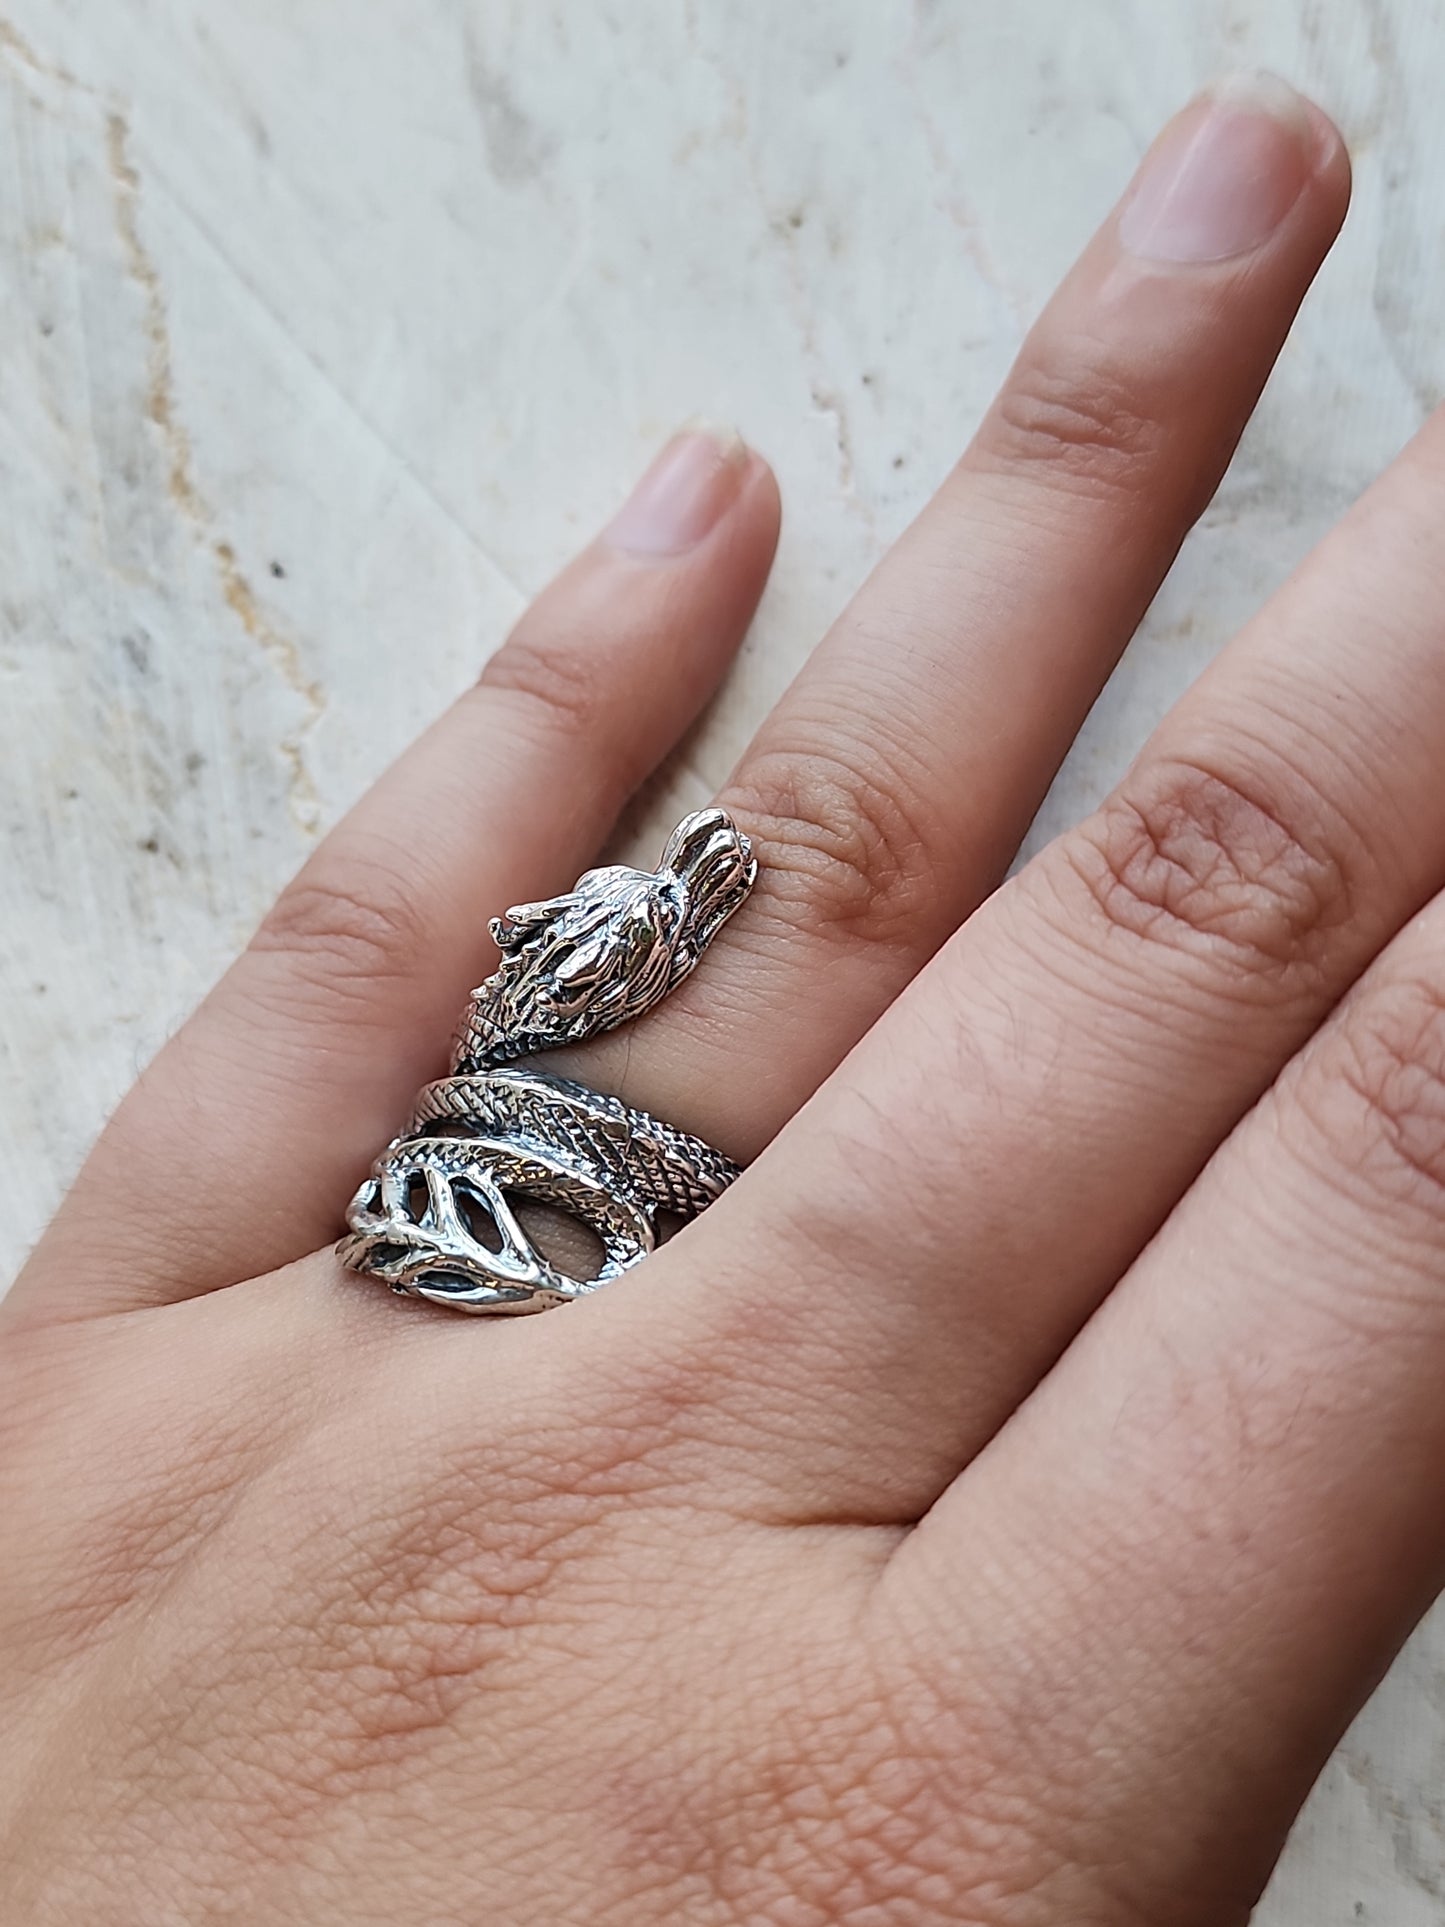 S.S. Adjustable Dragon Coiled Rings